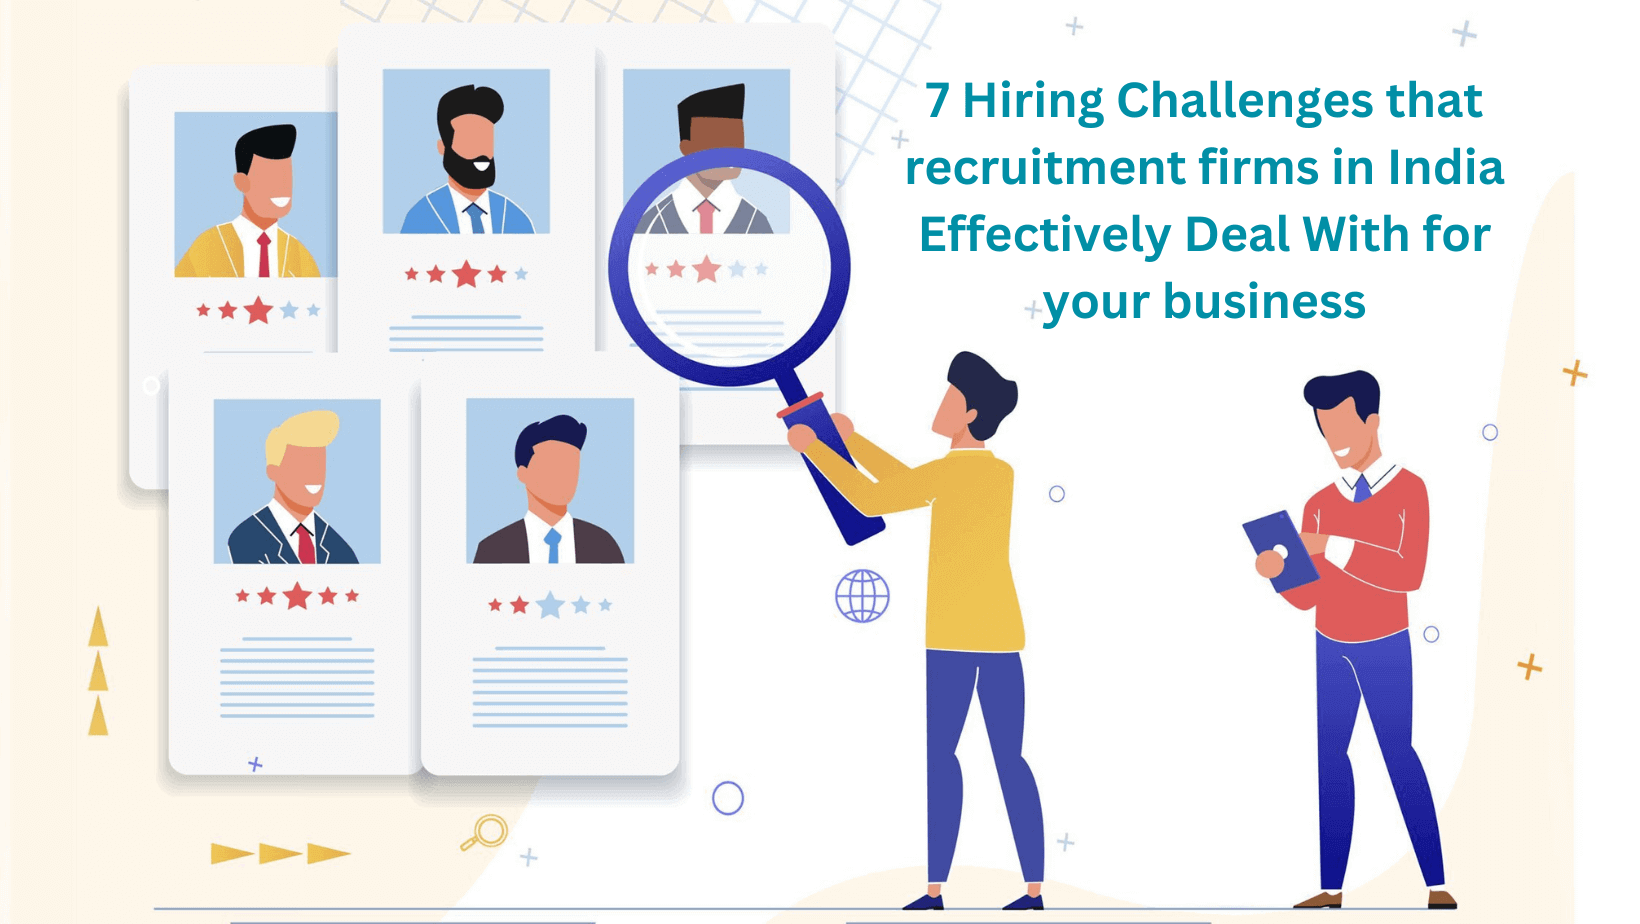 7 Hiring Challenges that recruitment firms in India Effectively Deal With for your business